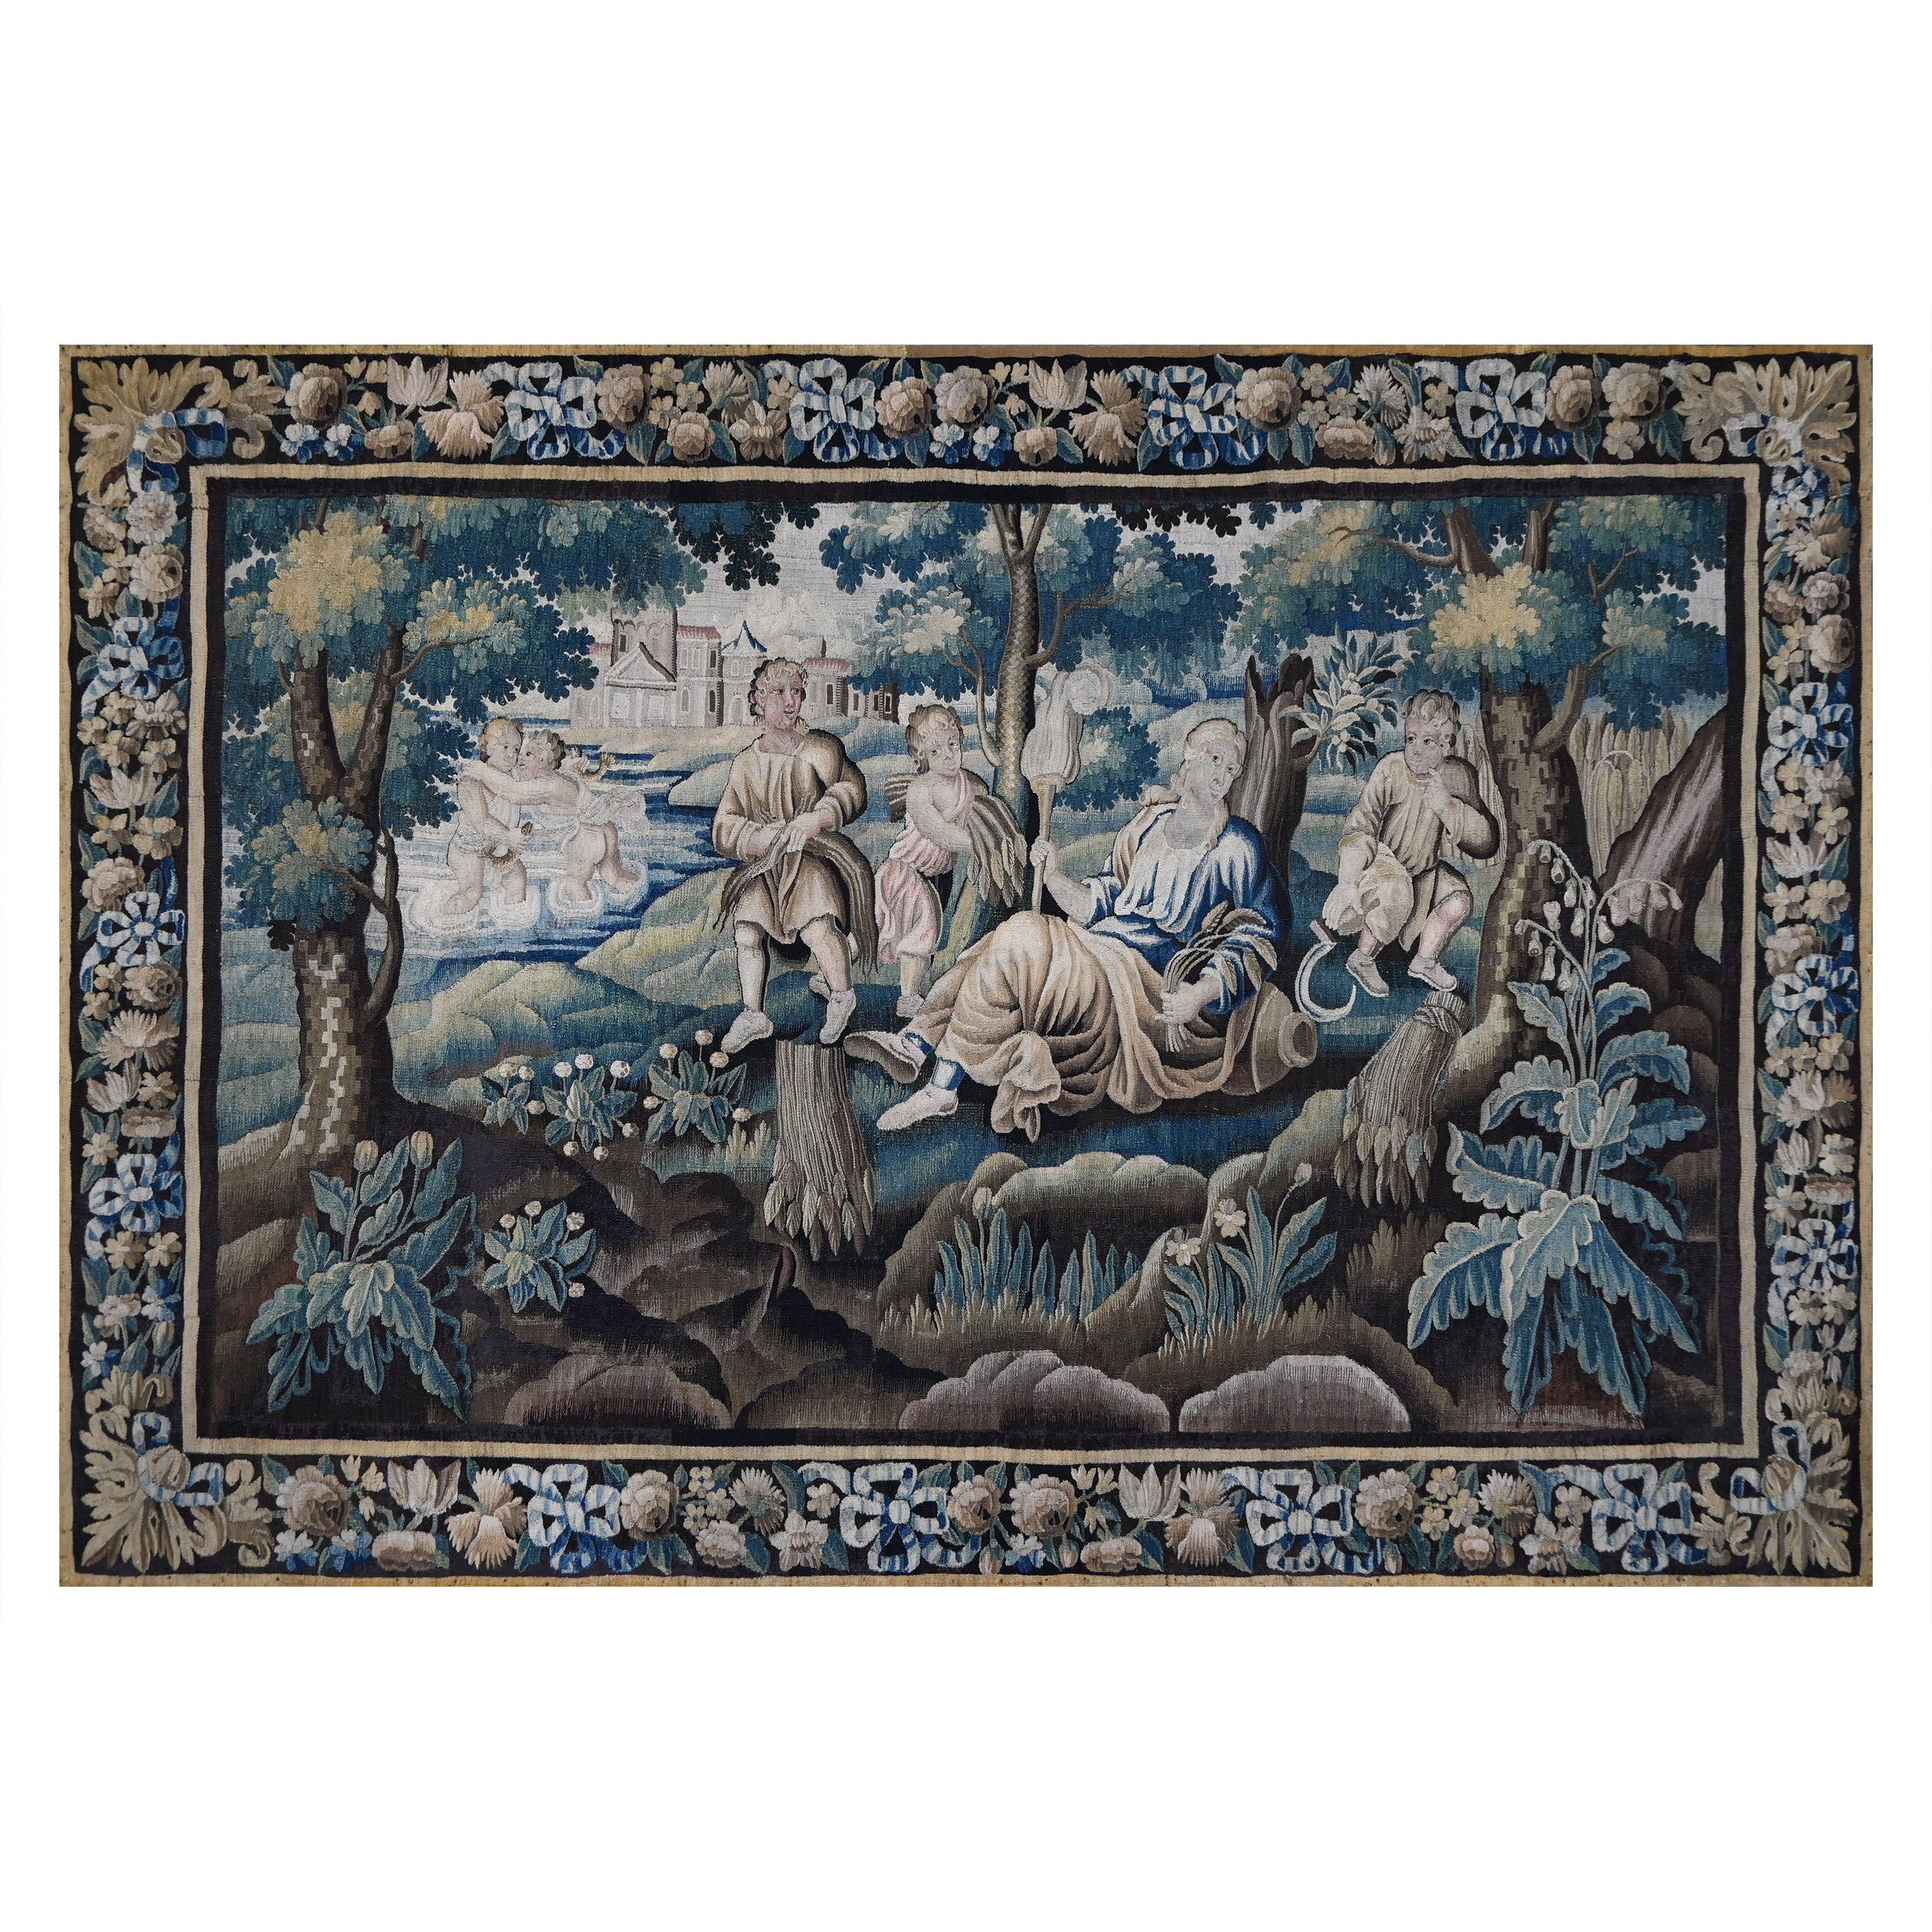 17th century Aubusson tapestry - the rest after the harvest - N° 1331